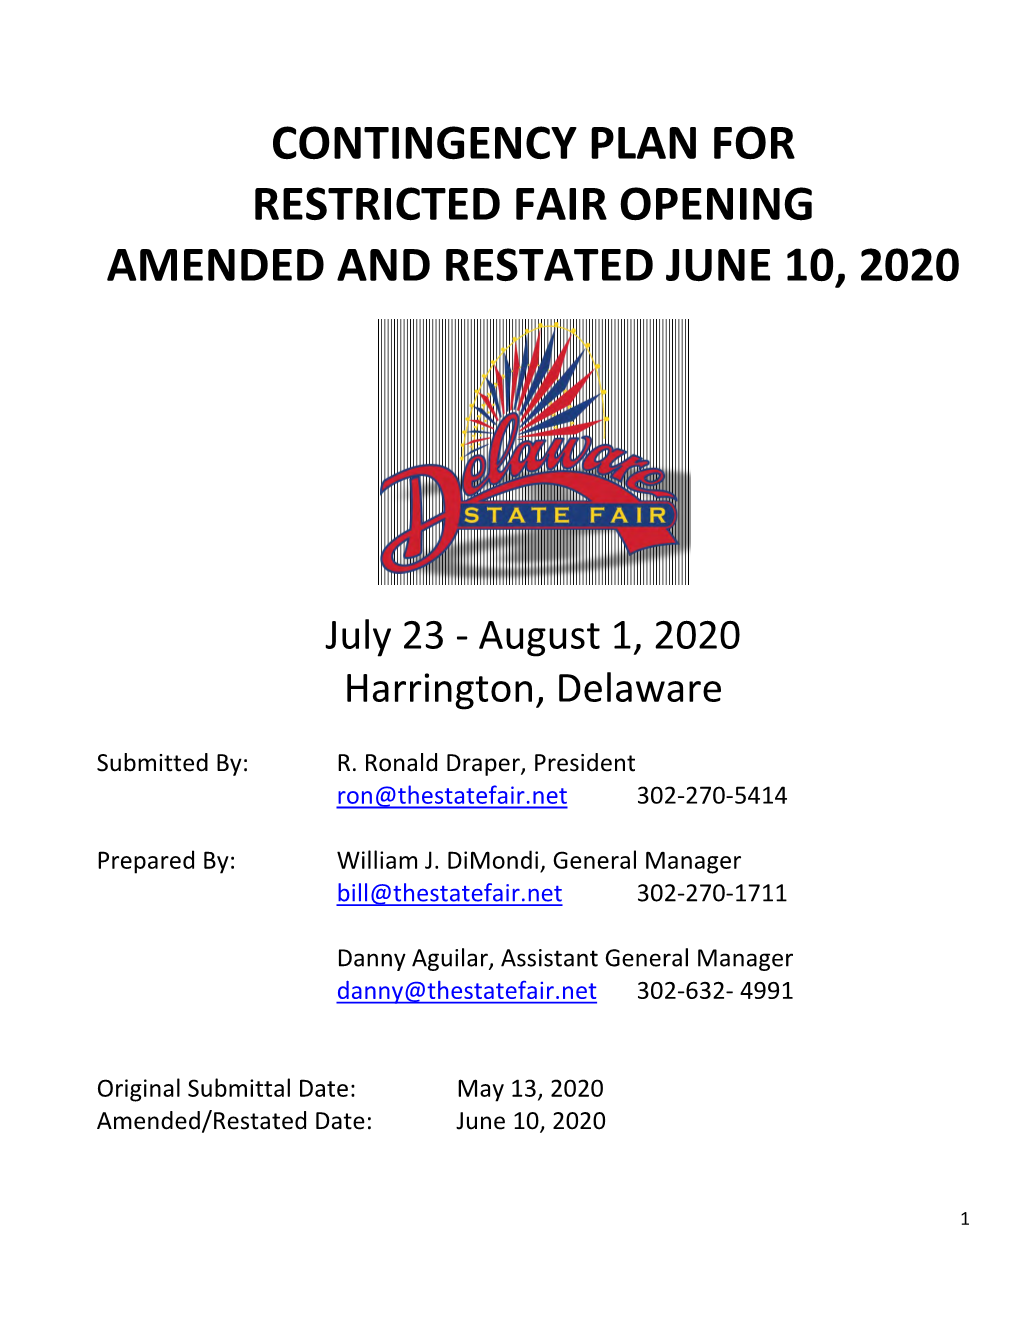 Delaware State Fair Restricted Opening